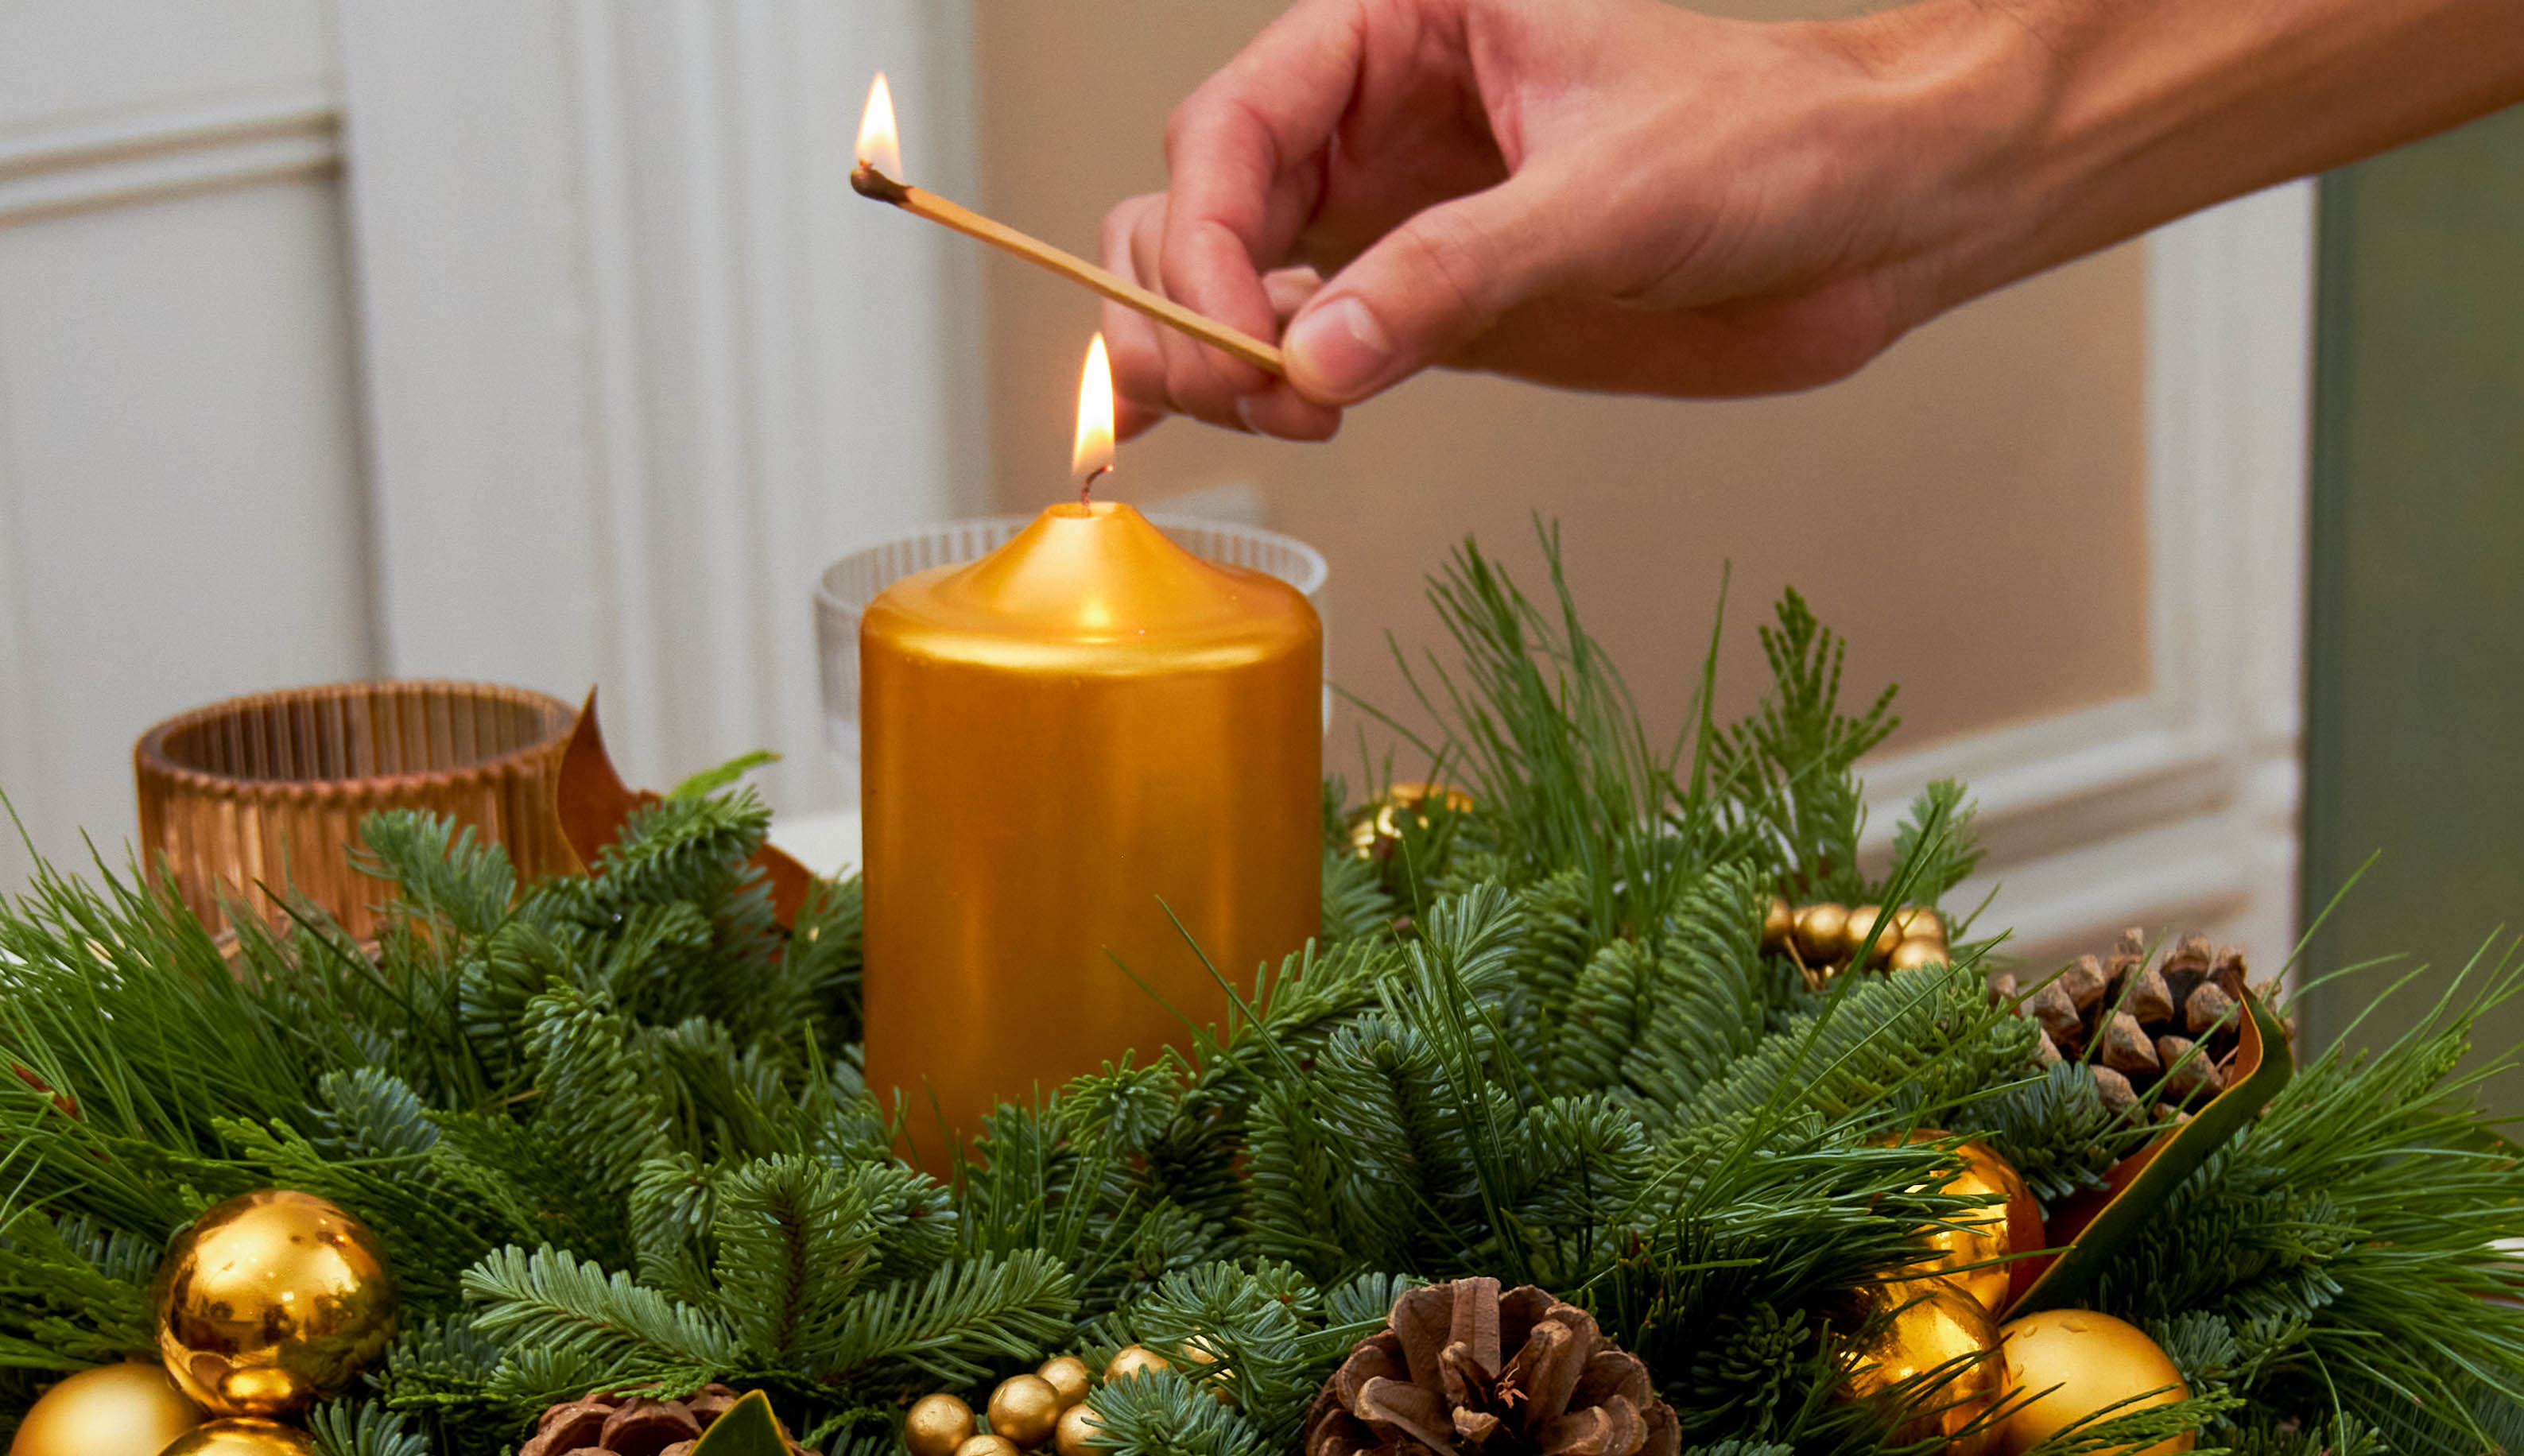 Hand lighting a candle for a table centerpiece